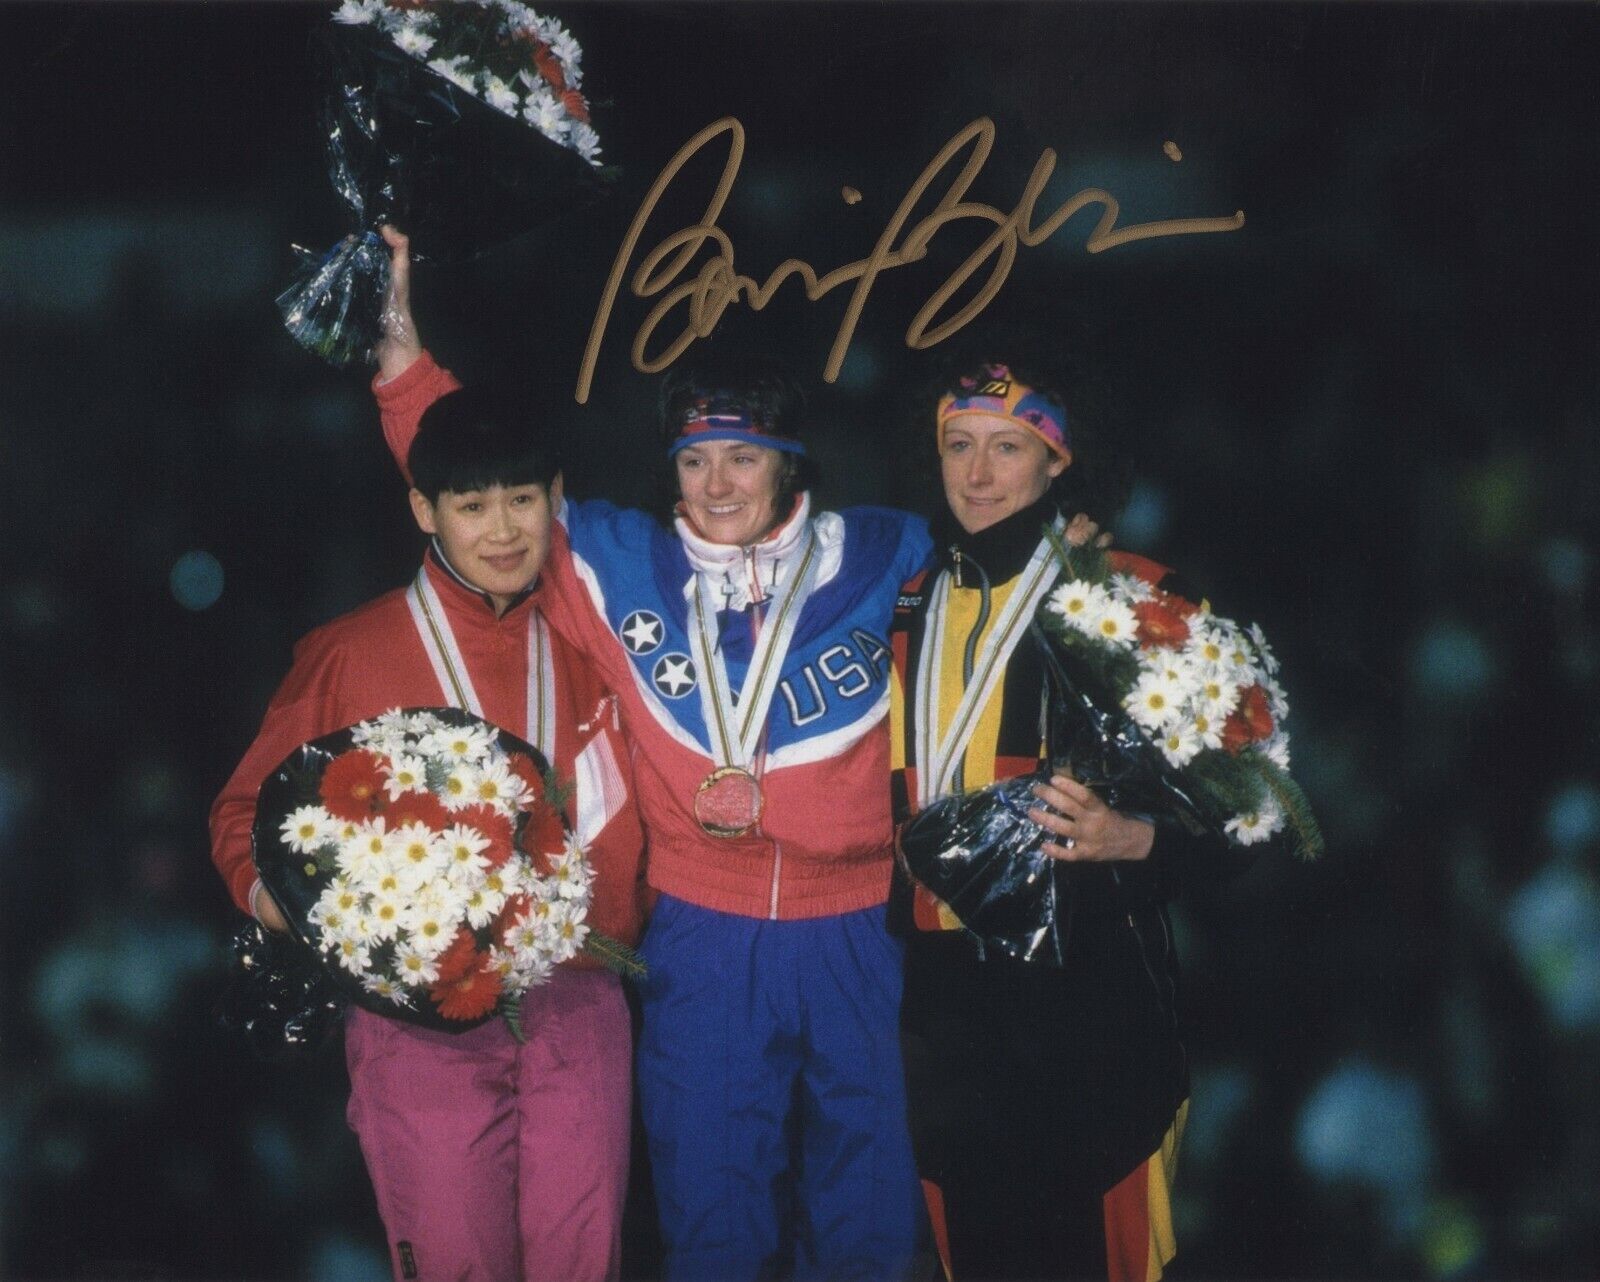 BONNIE BLAIR SIGNED AUTOGRAPH SPEED SKATING OLYMPICS 8X10 Photo Poster painting GOLD MEDAL #3